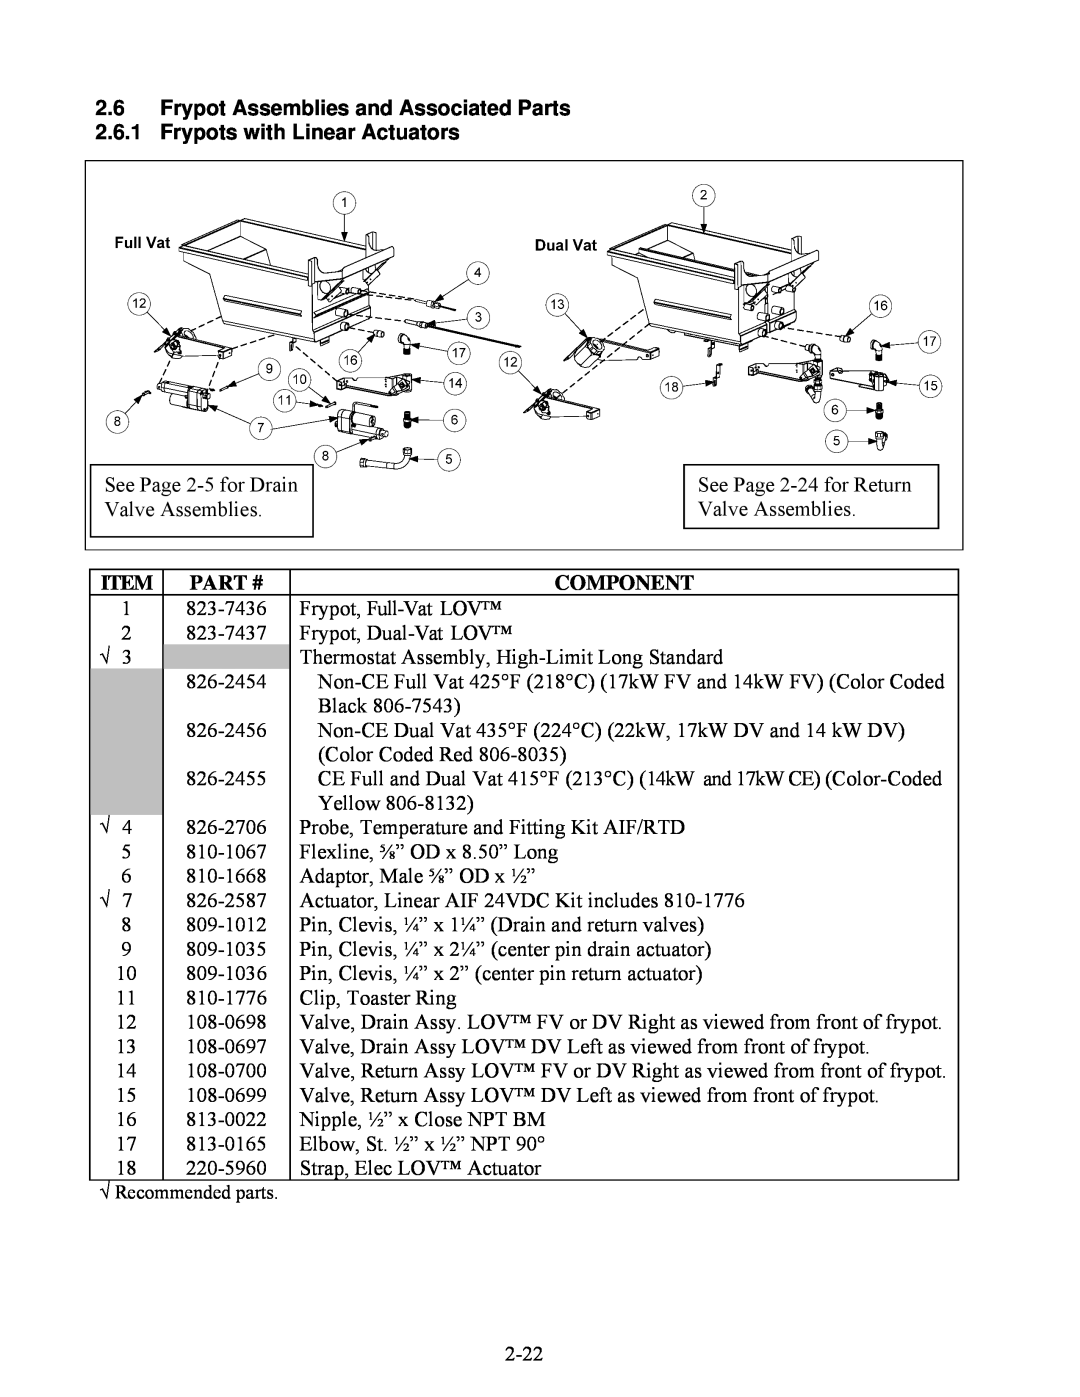 Frymaster BIELA14 manual See Page 2-5for Drain Valve Assemblies, Part #, Component 